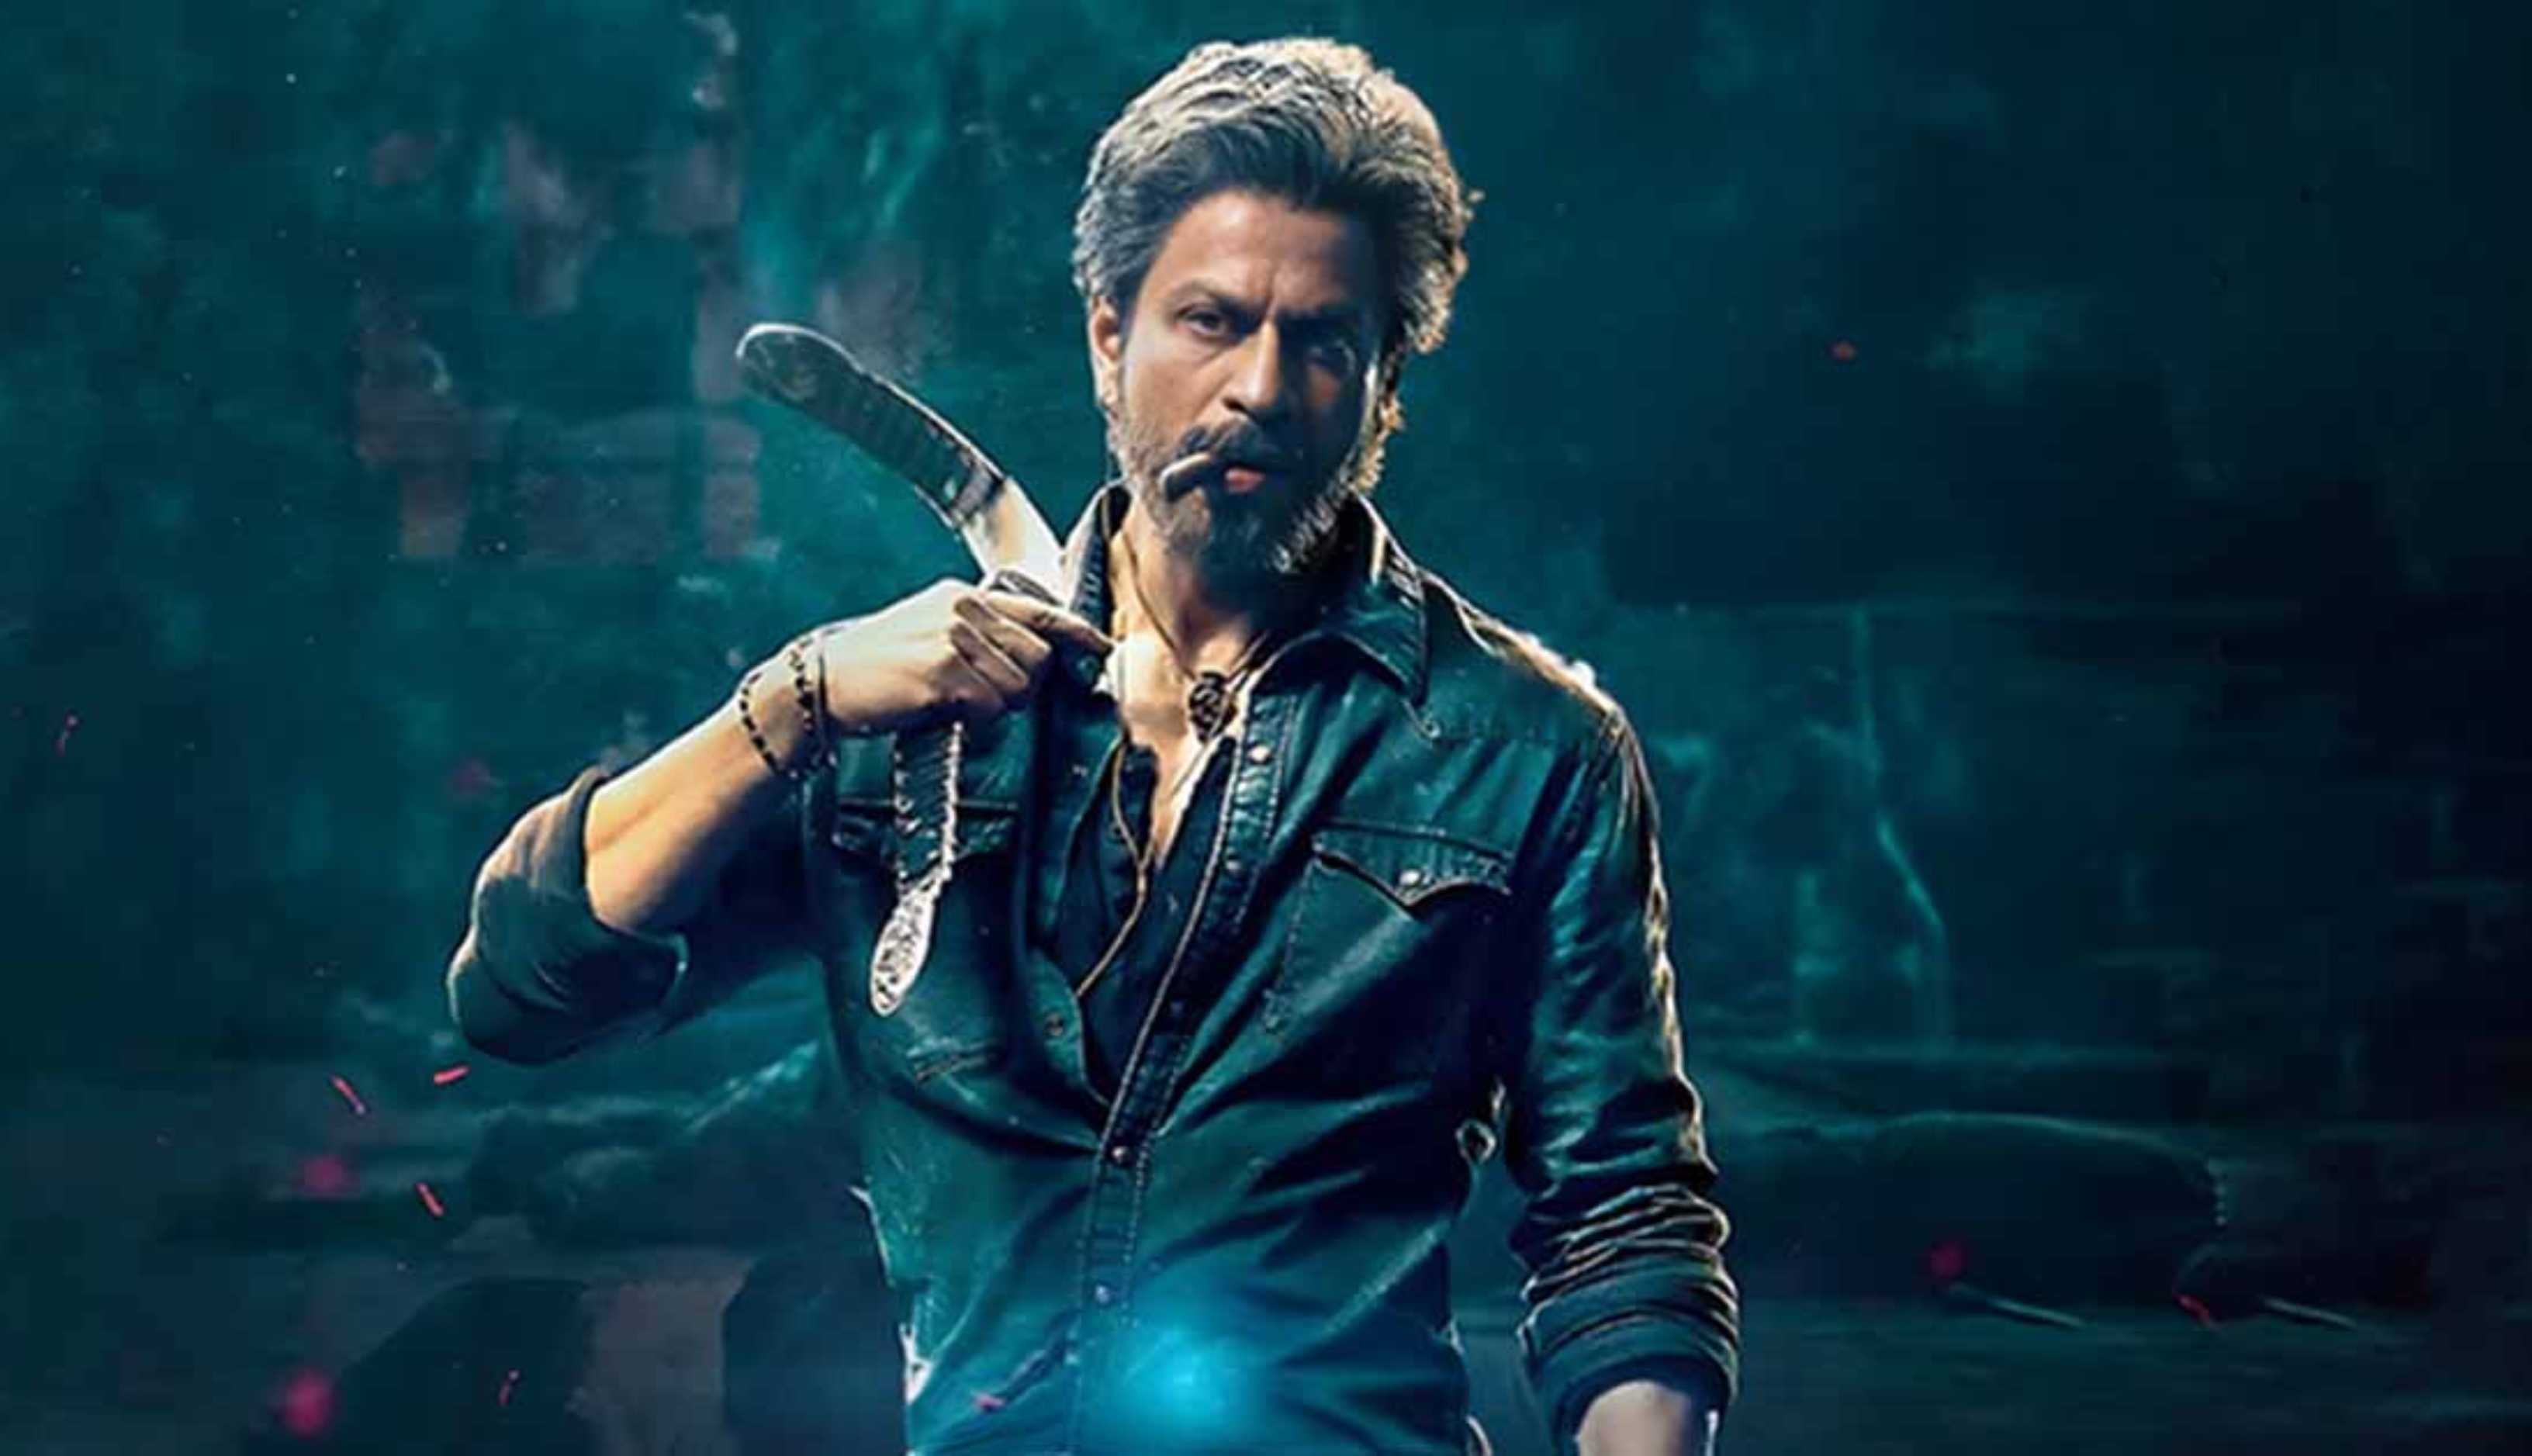 Jawan Box Office Day 18: After Pathaan, Shah Rukh Khan races towards the Rs 1000-crore club with Atlee’s film